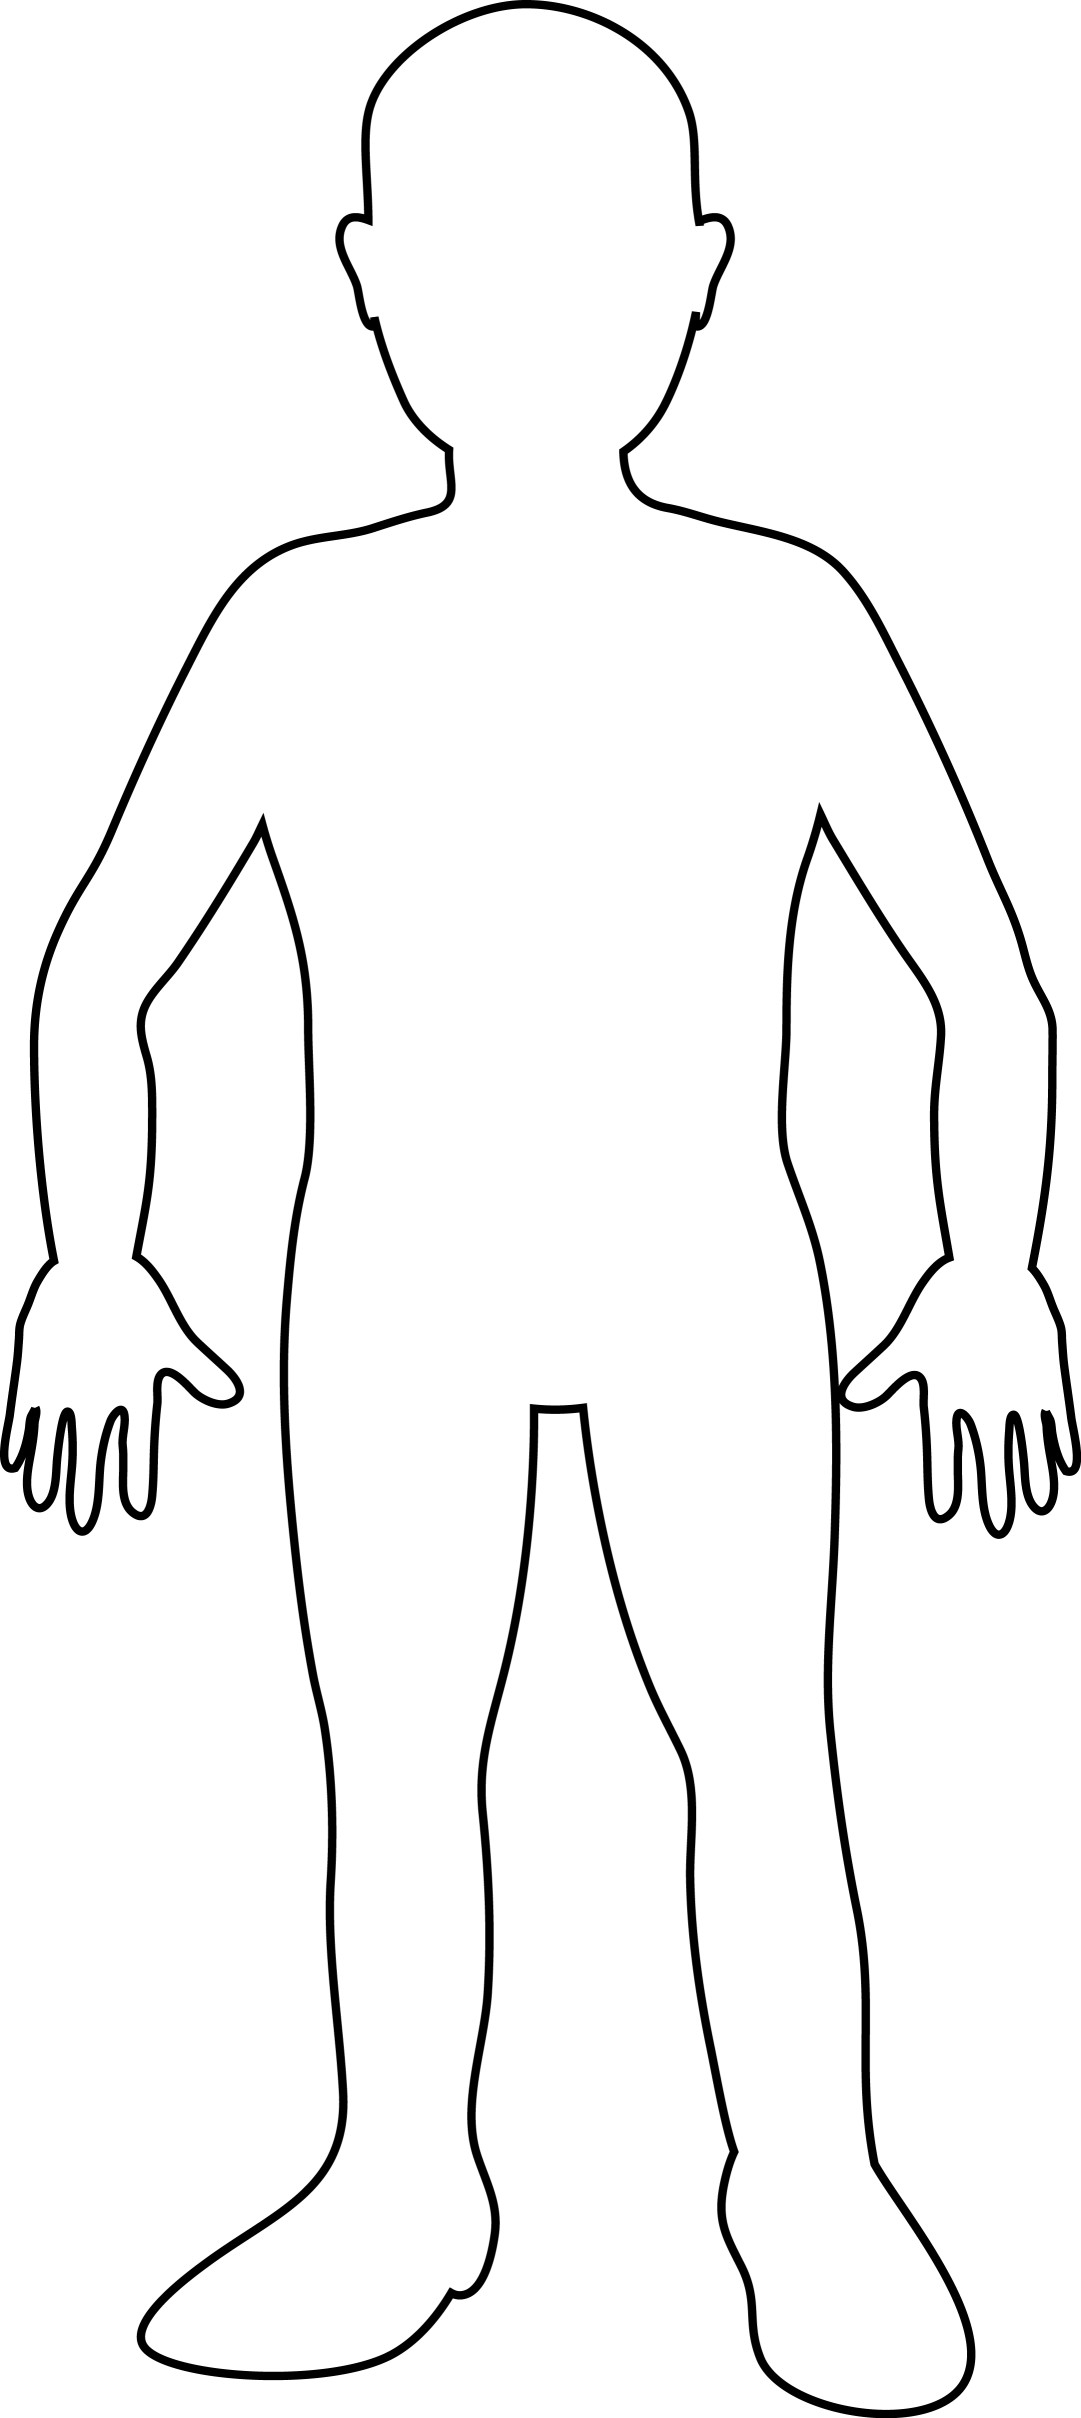 Free Person Outline, Download Free Person Outline png images, Free ... Simple Person Outline